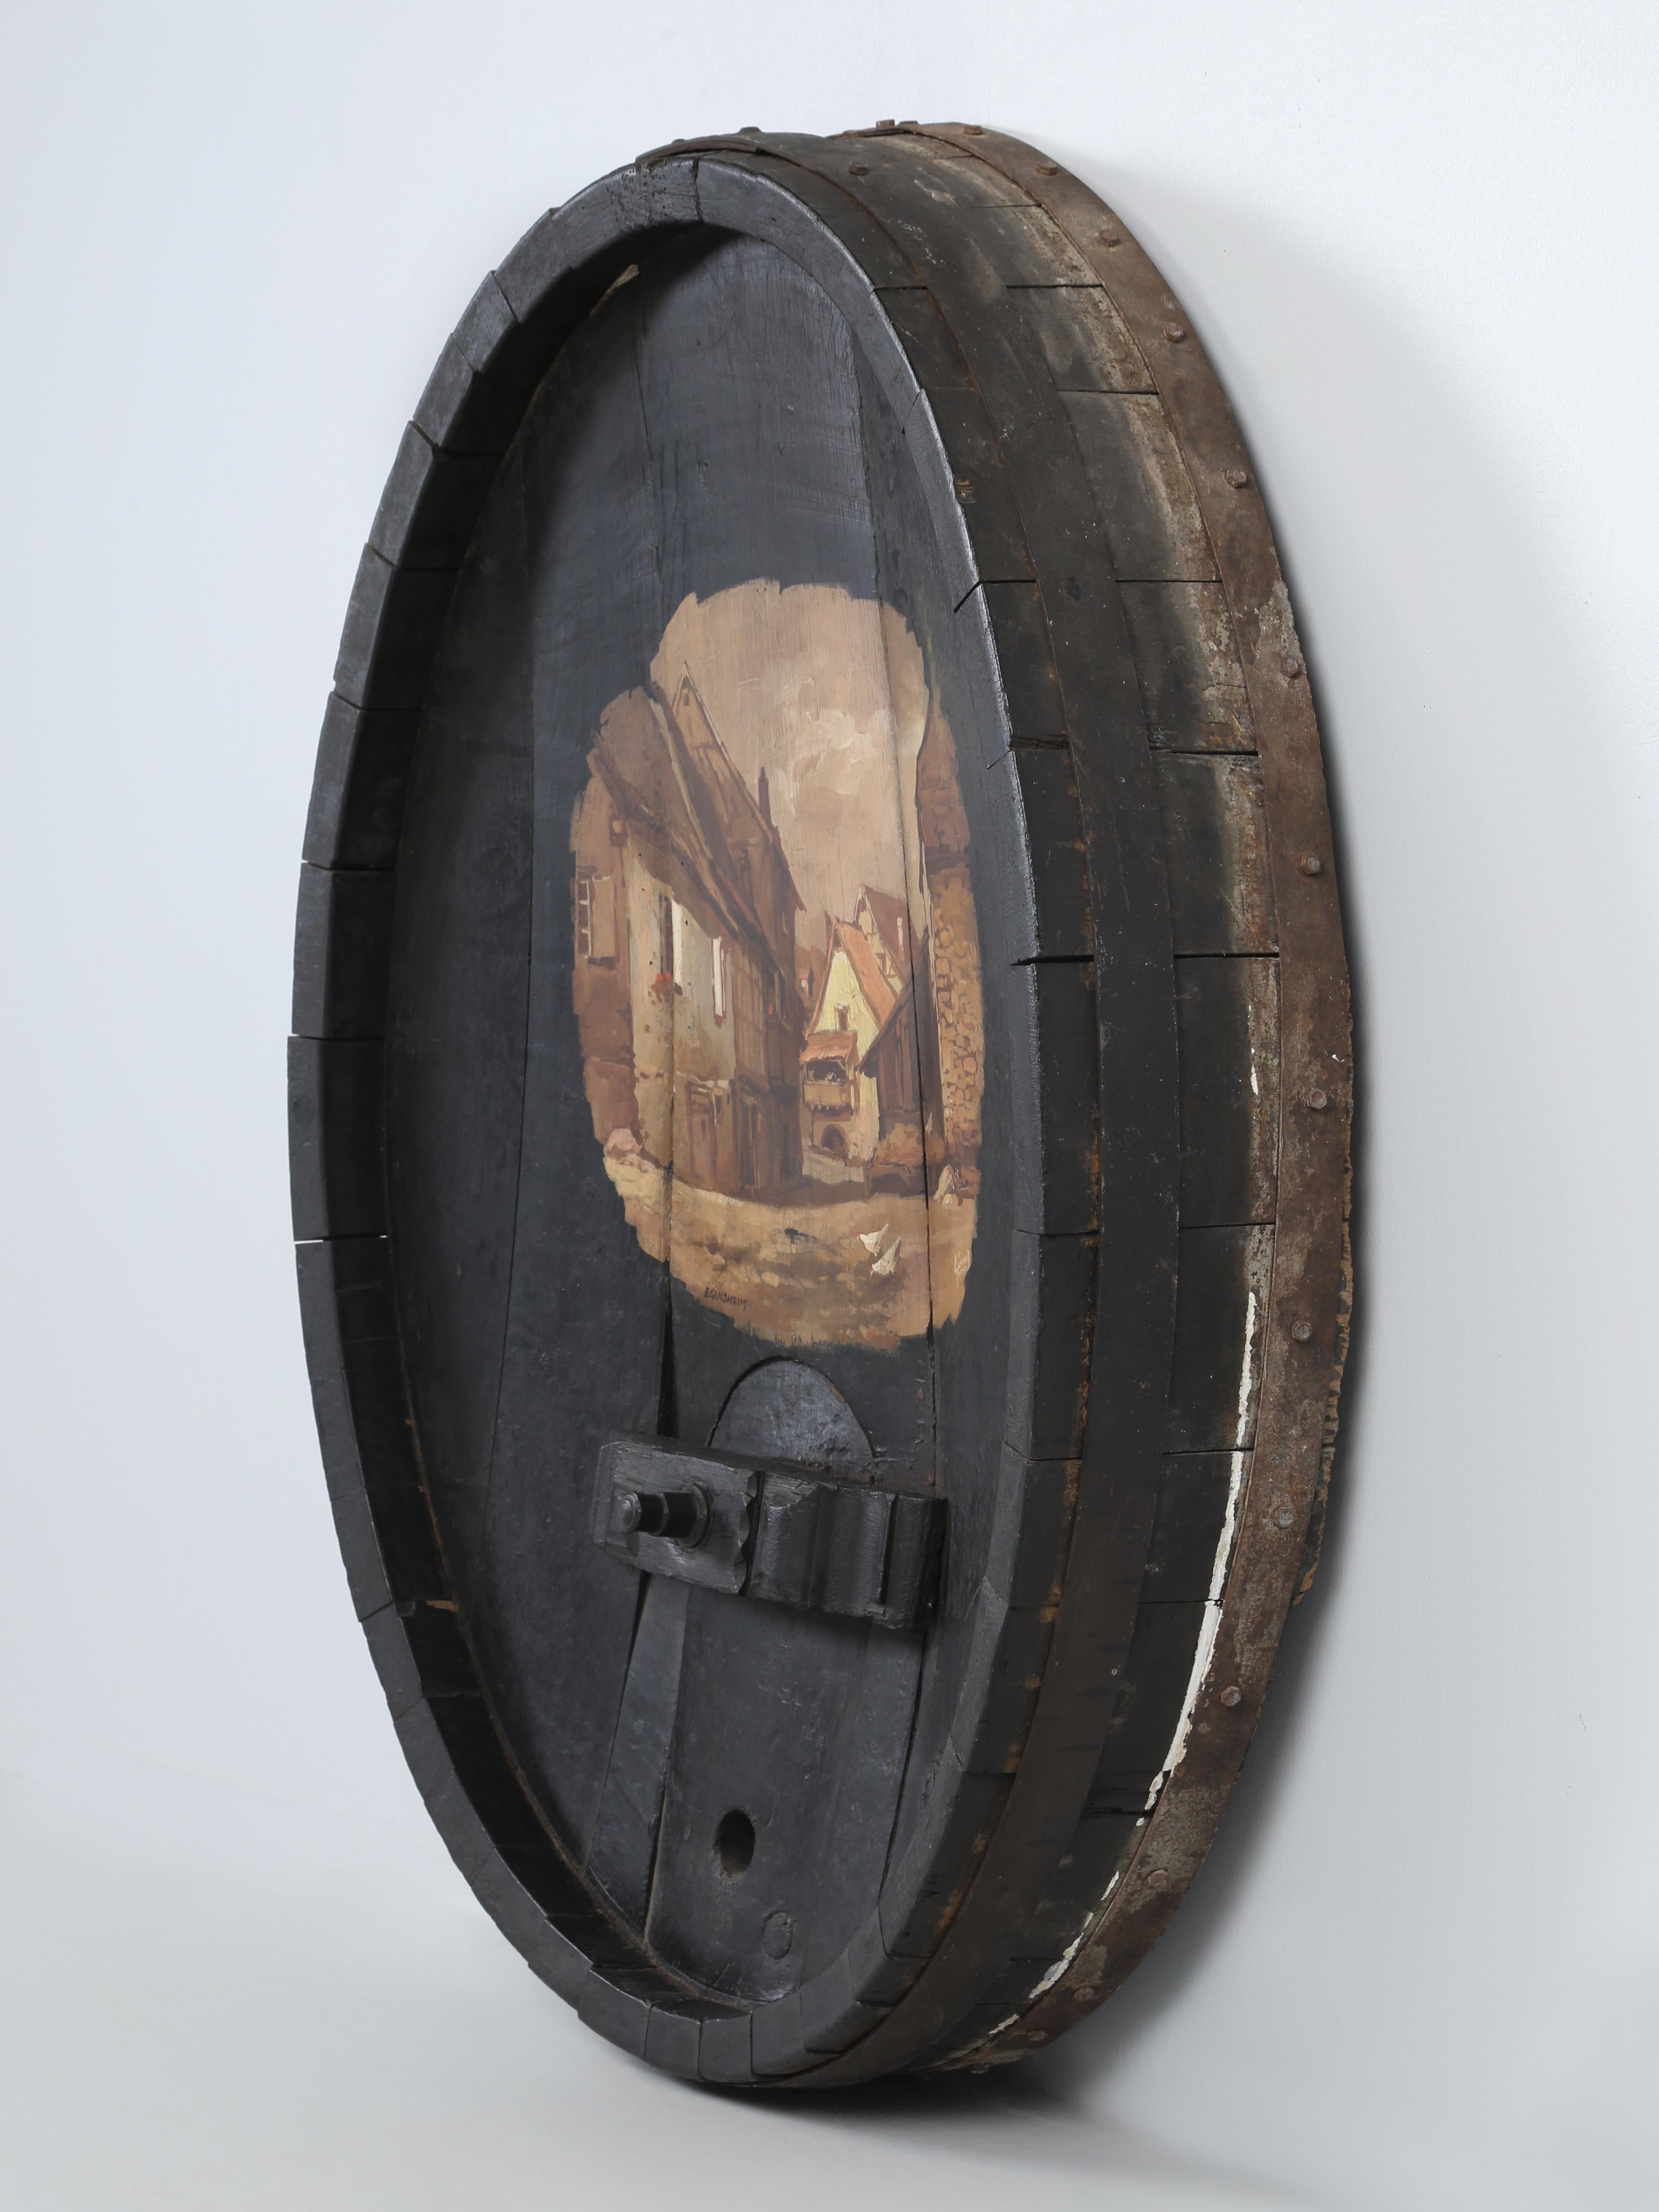 Antique Wine Barrel End Cap that was repurposed into an unusual piece of Wall Art that would be ideal for a Wine Room. The painting itself is of the old town of Eguisheim, France which is a medieval village, complete with castles in the famous